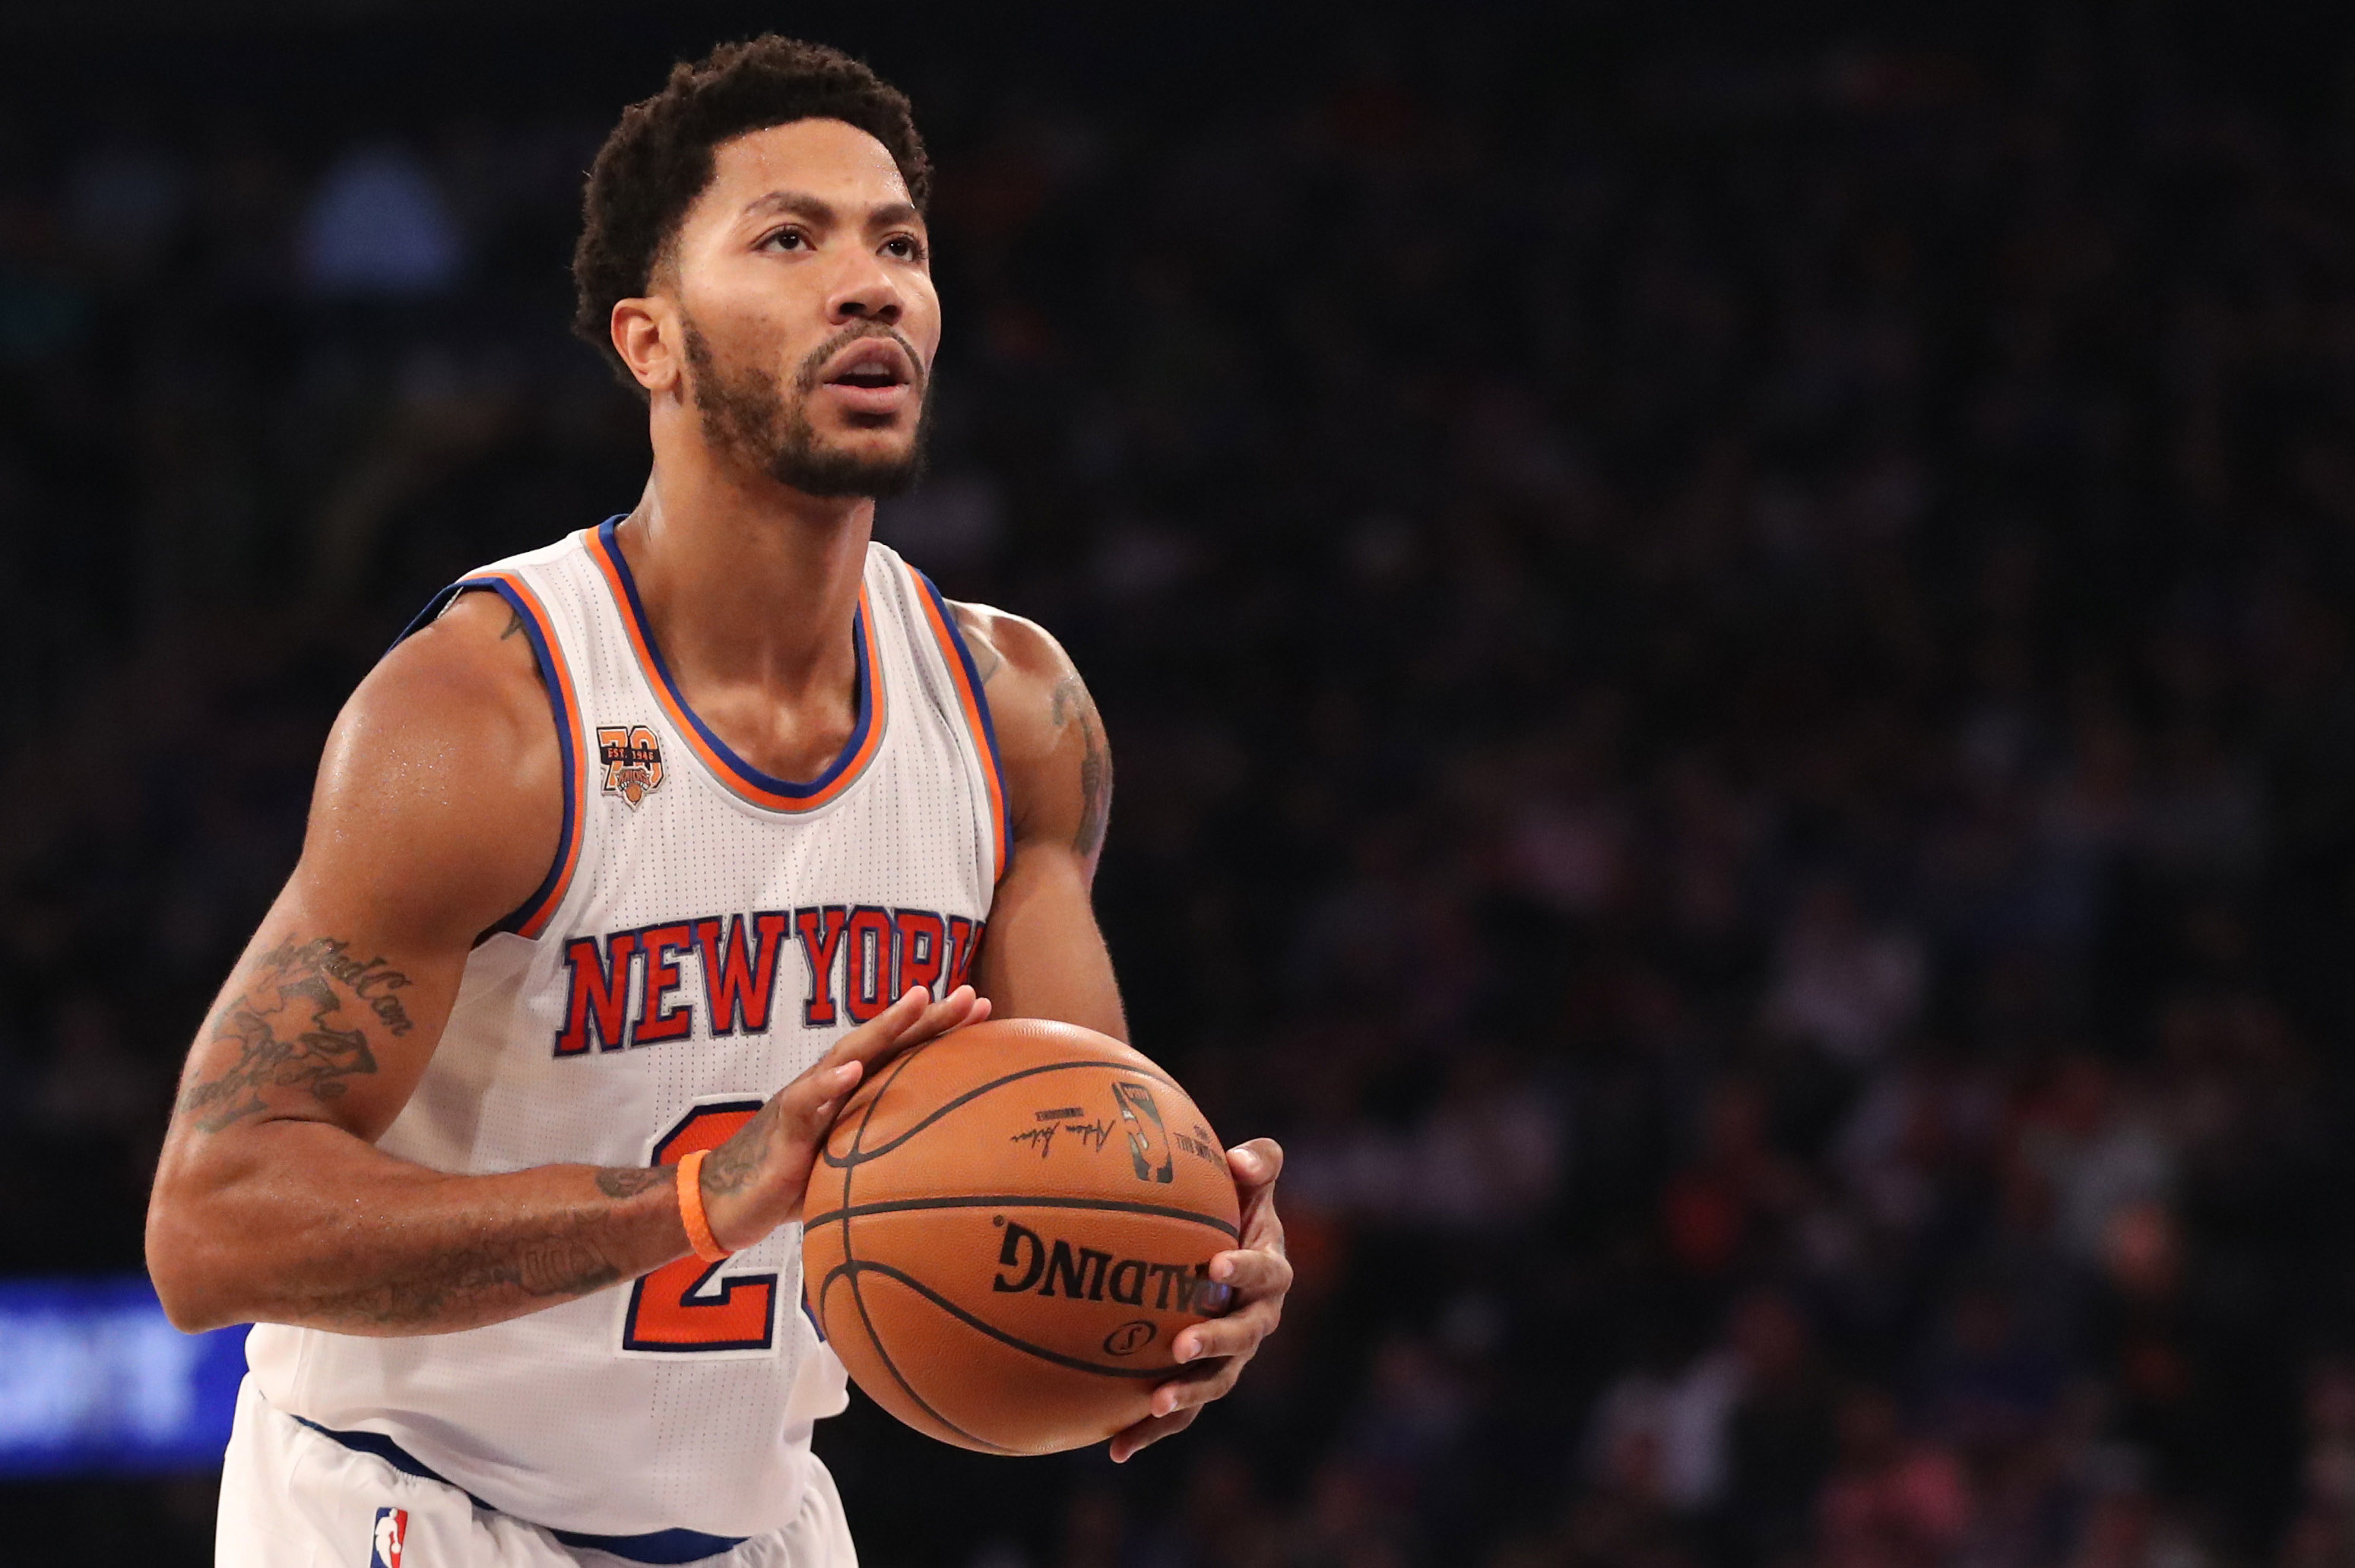 San Antonio Spurs: Pros and cons of signing Derrick Rose3098 x 2063